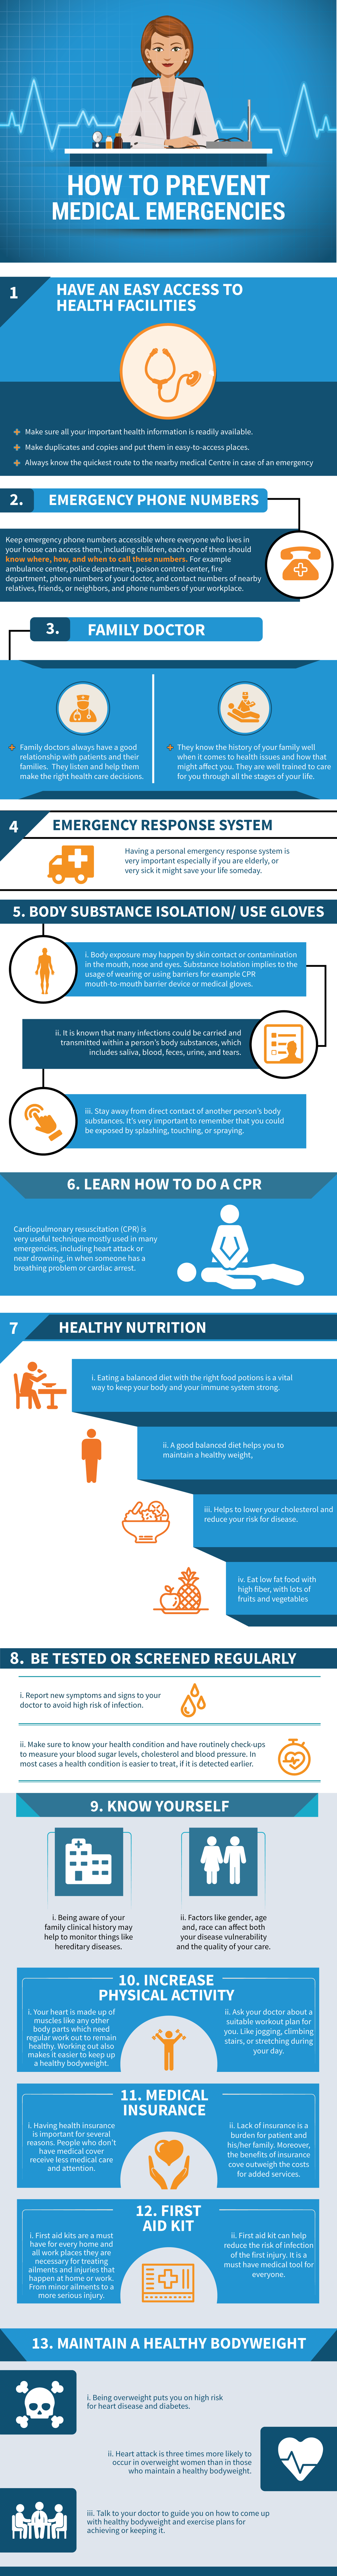 Infographics-How to prevent medical emergency